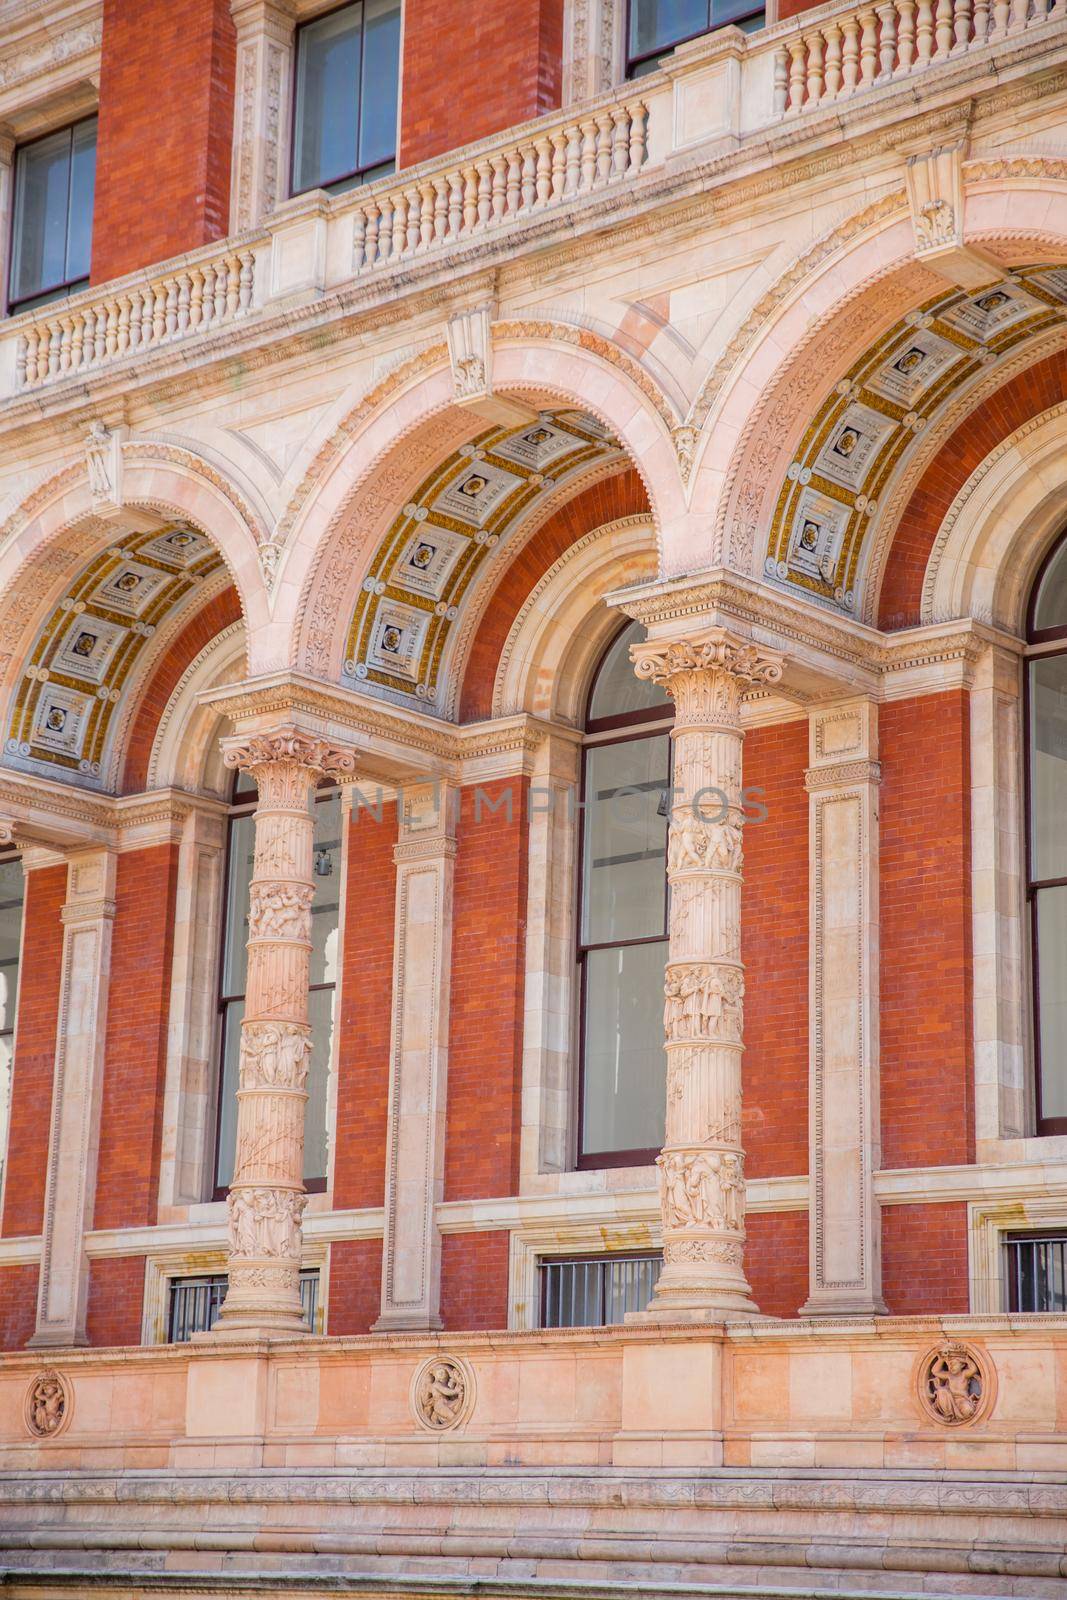 Majestic columns and arches with classic design of Victoria and Albert Museum. Beautiful British building with Victorian architecture. Arts and museums